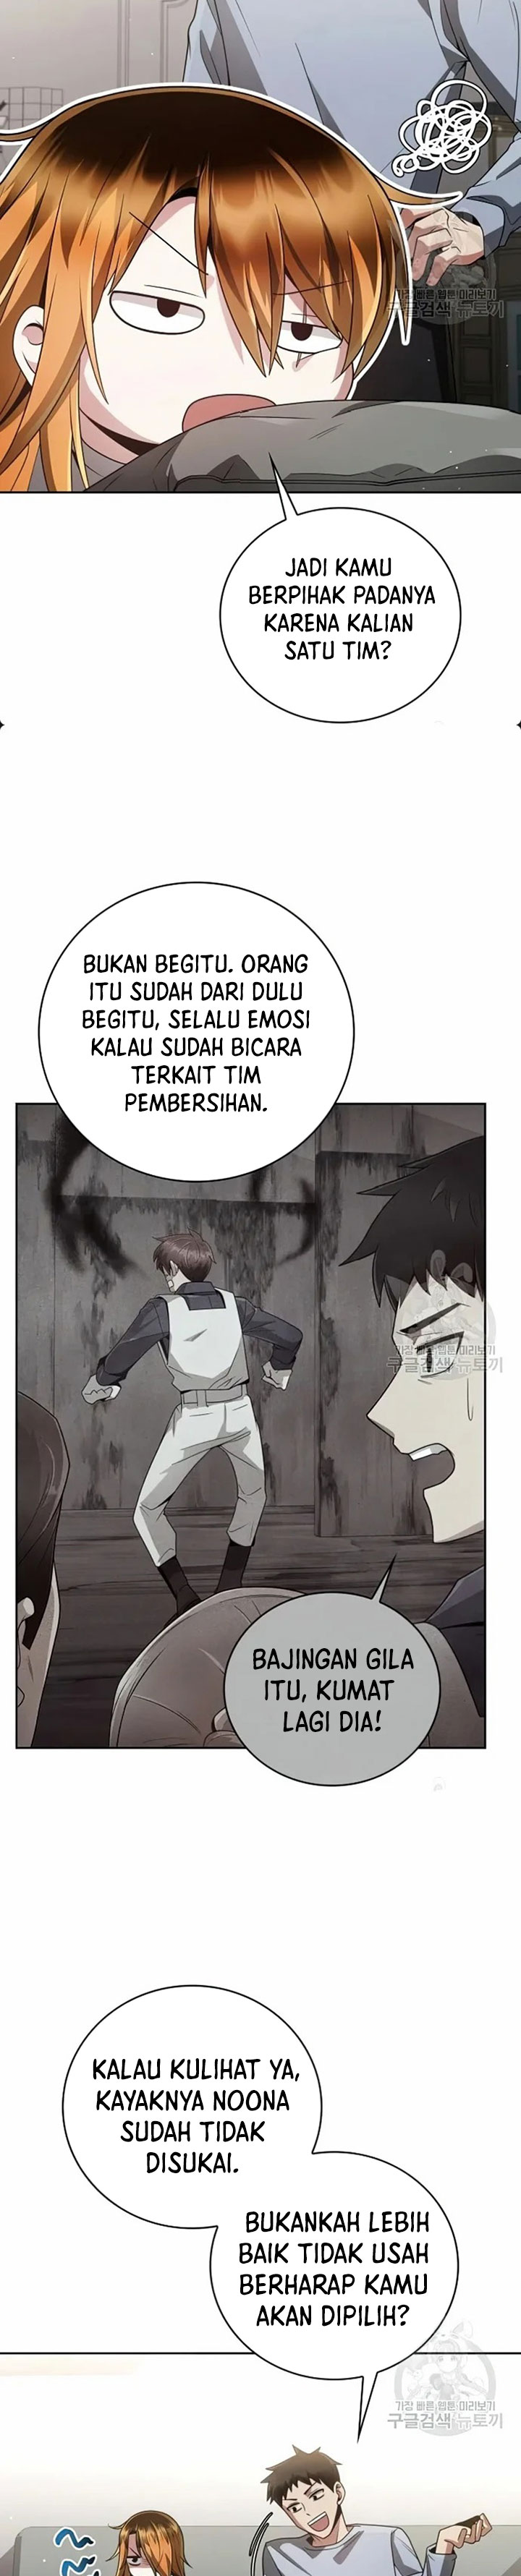 Dilarang COPAS - situs resmi www.mangacanblog.com - Komik clever cleaning life of the returned genius hunter 029 - chapter 29 30 Indonesia clever cleaning life of the returned genius hunter 029 - chapter 29 Terbaru 25|Baca Manga Komik Indonesia|Mangacan